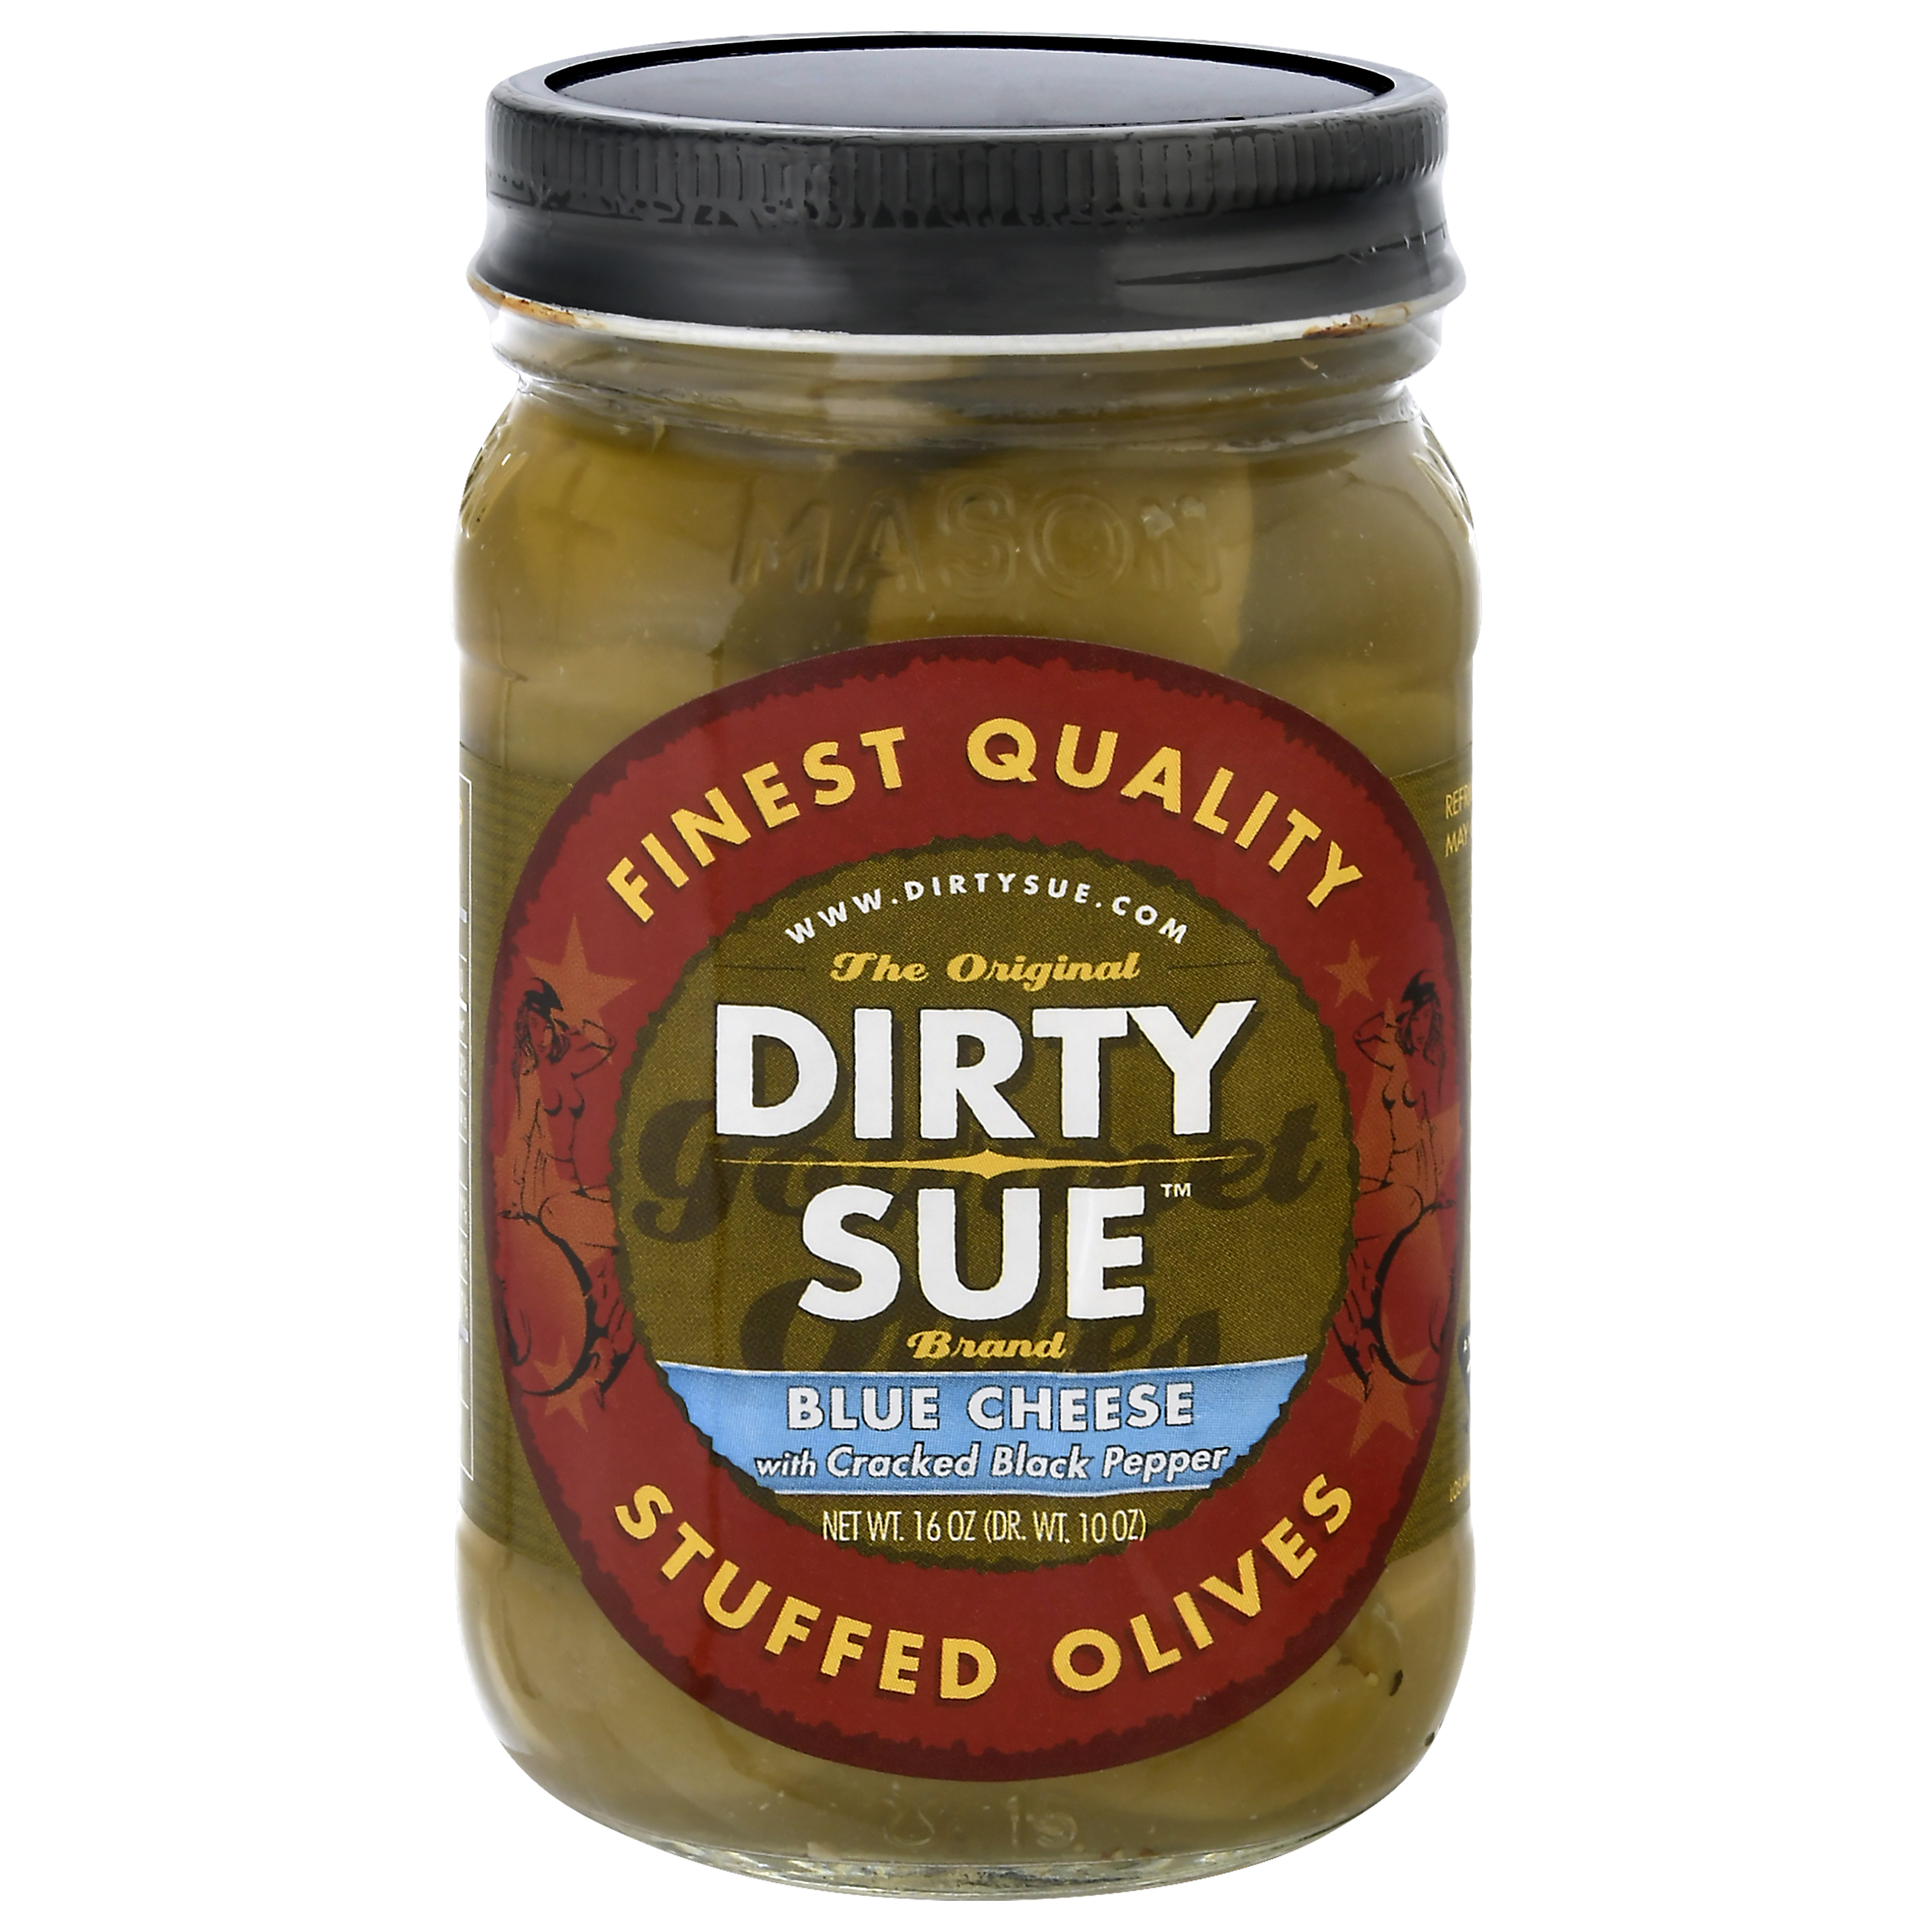 Dirty Sue Blue Cheese With Cracked Black Pepper Stuffed Olives 16 Oz